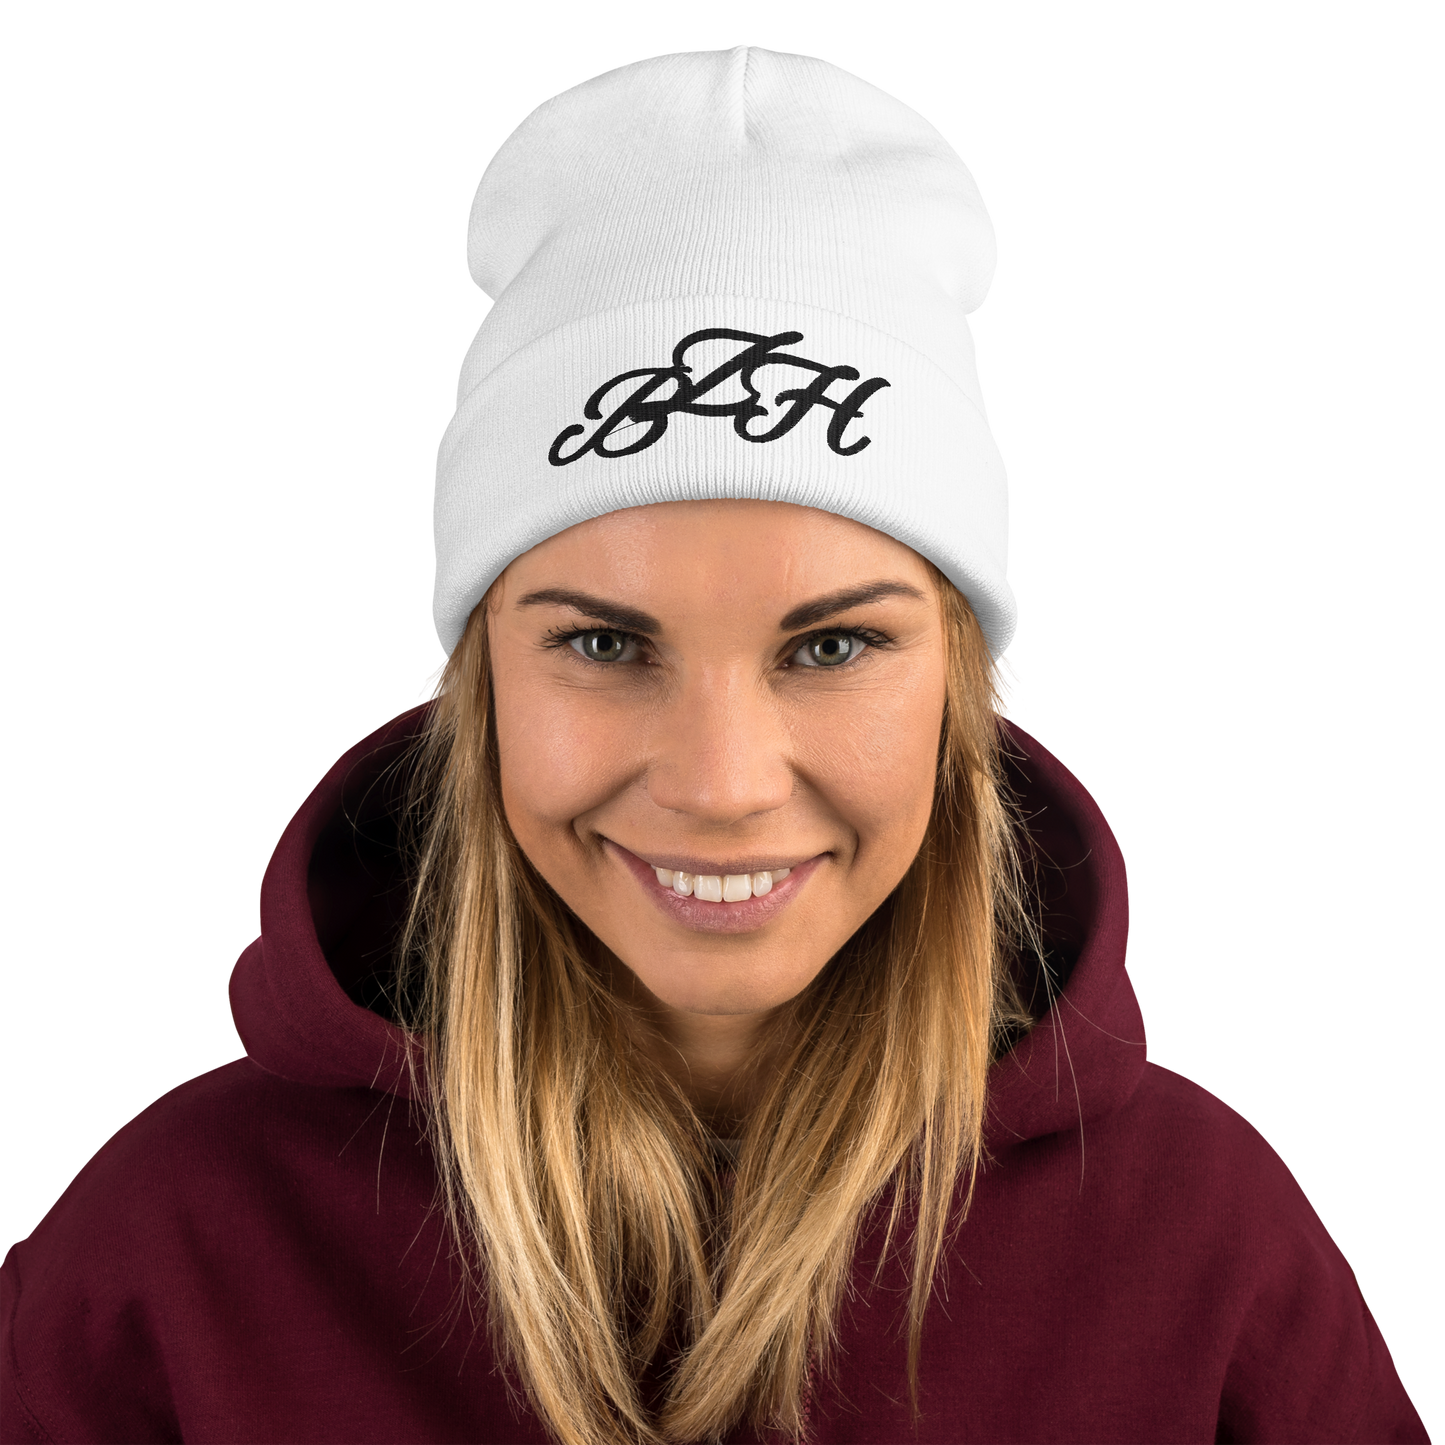 BZH Heart embroidered hat - The perfect Breton hat